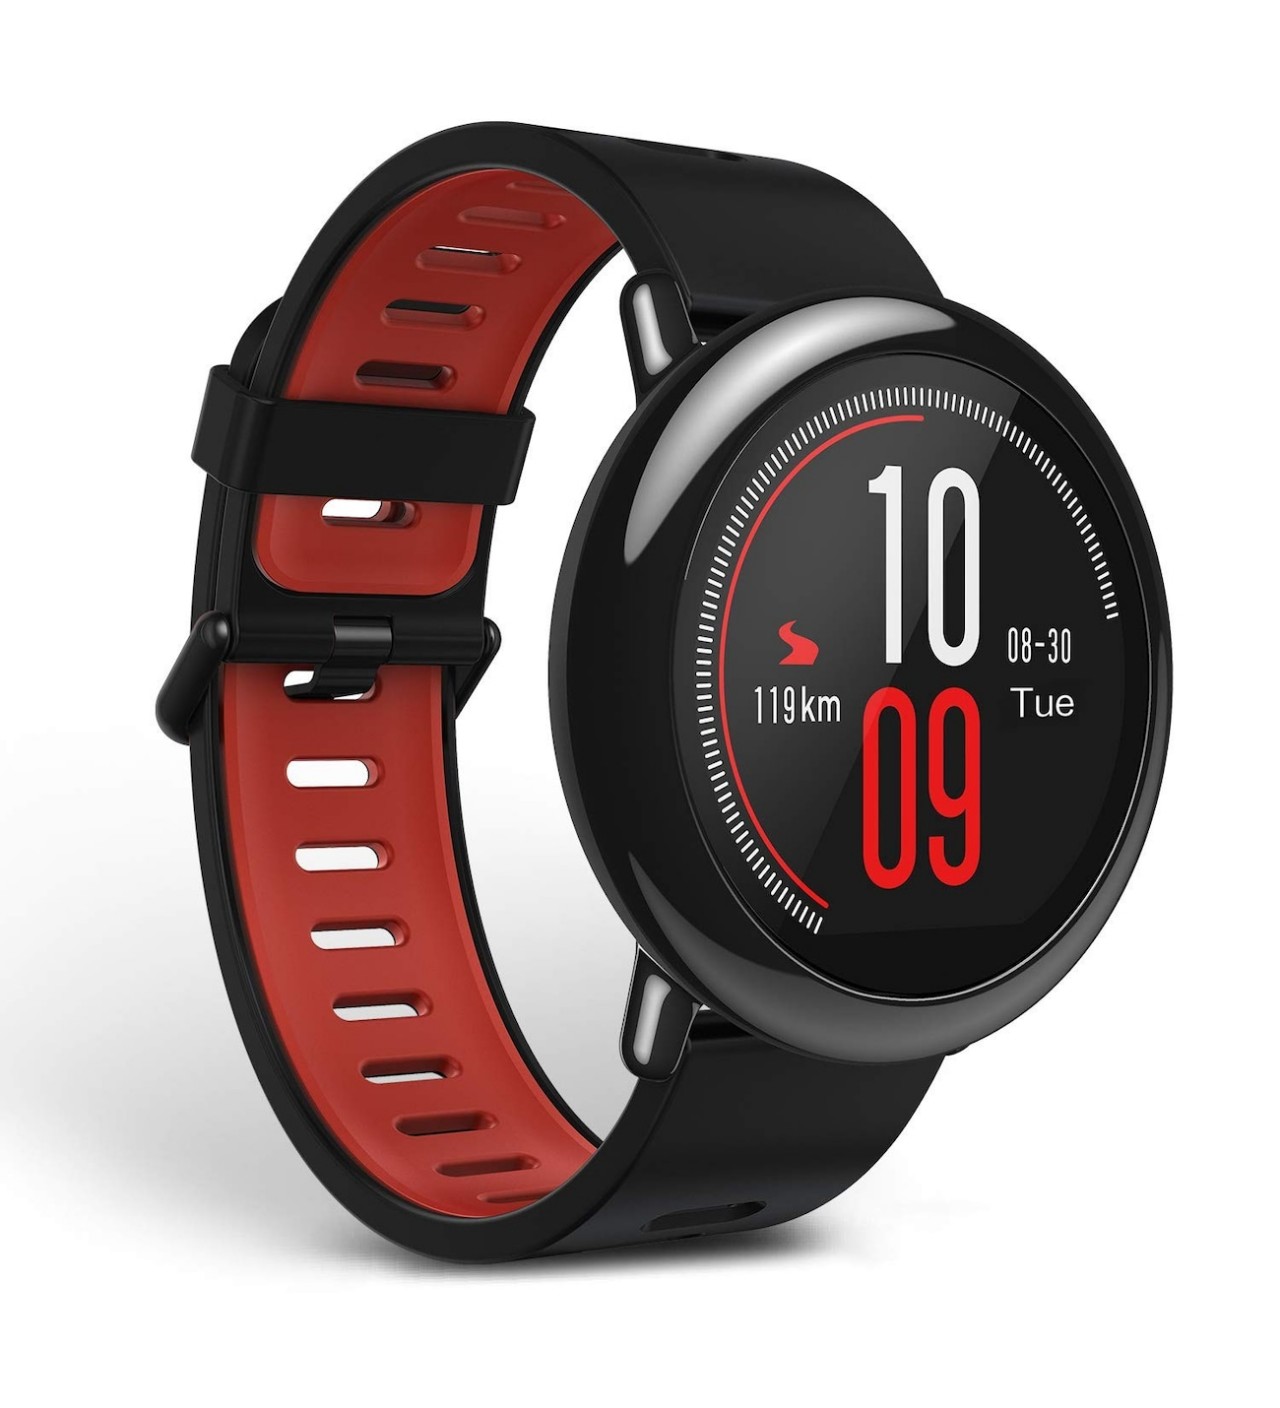 The Amazfit Pace is estimated to have a battery life